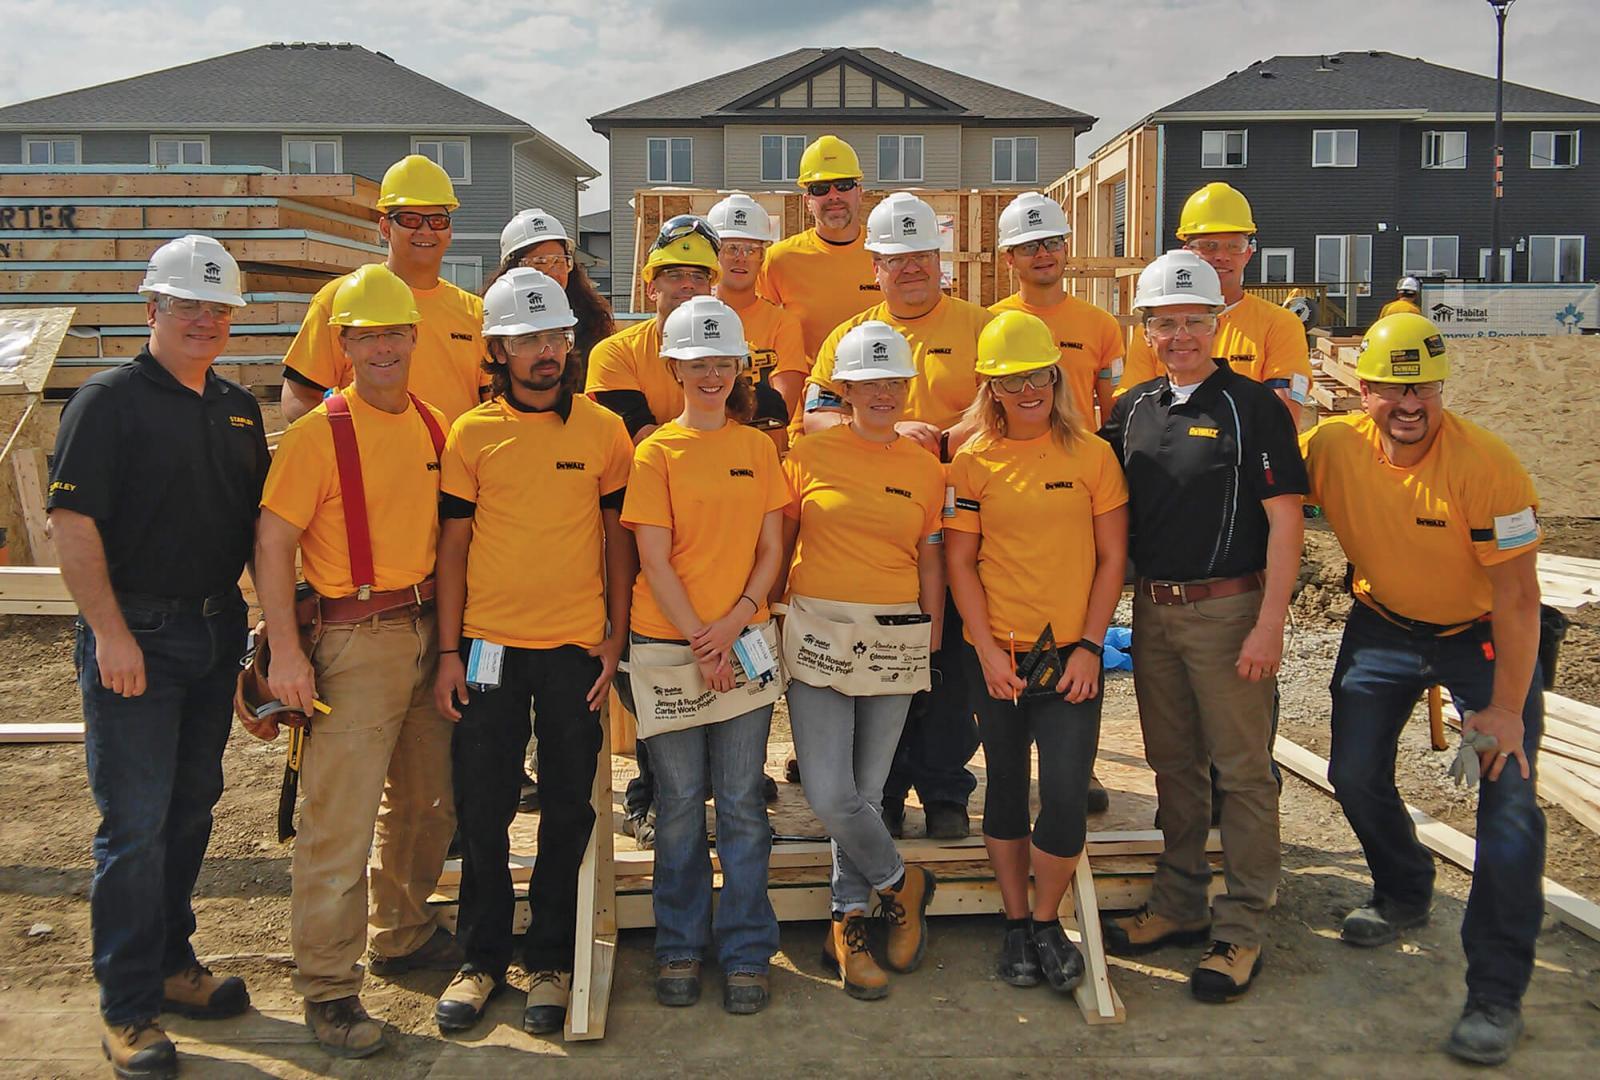 Habitat for Humanity teams up with Stanley Black and Decker for a cross-country, home building spree.